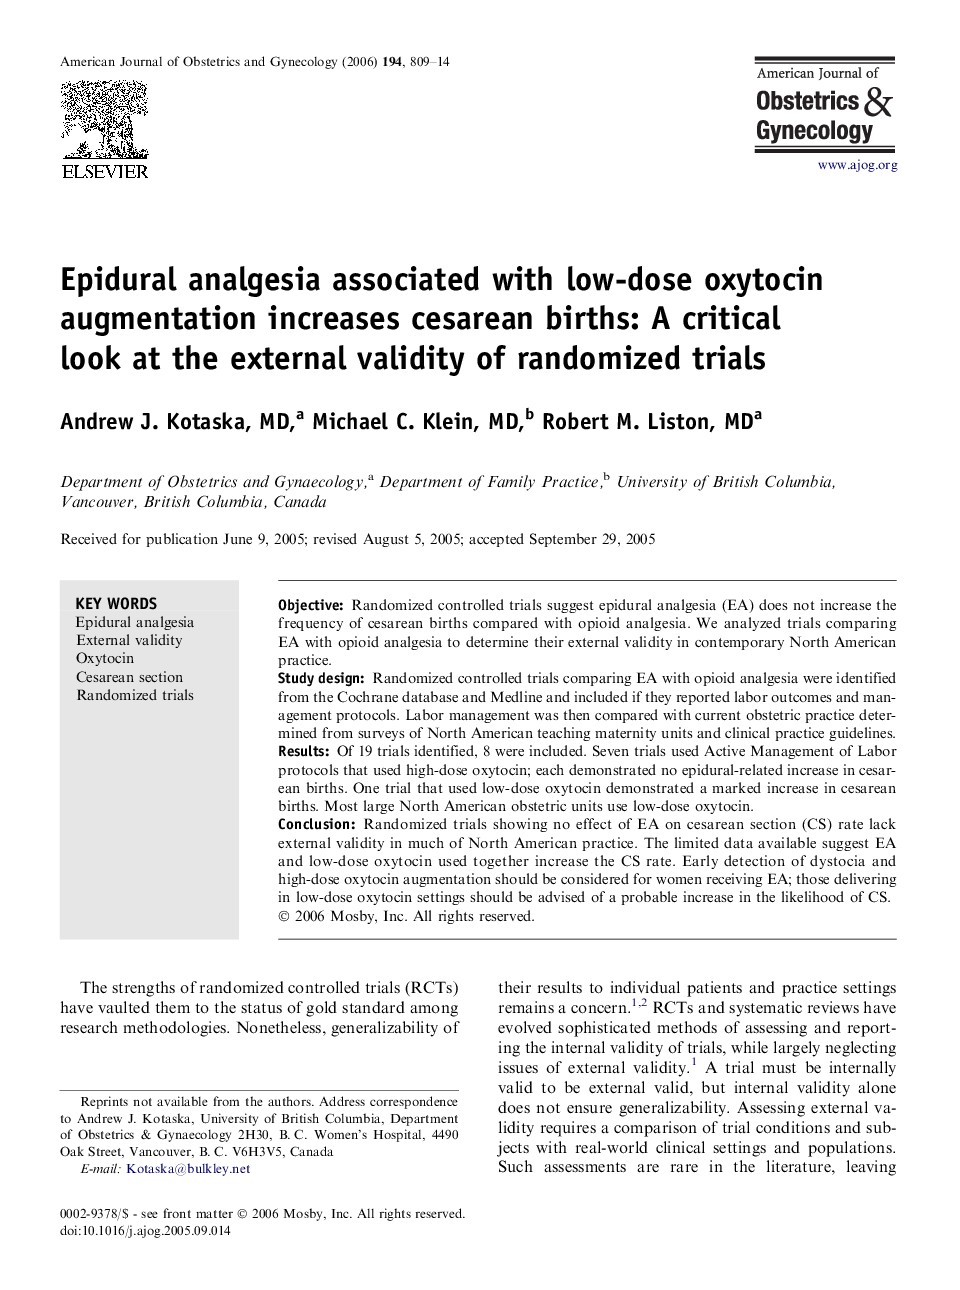 Epidural analgesia associated with low-dose oxytocin augmentation increases cesarean births: A critical look at the external validity of randomized trials 